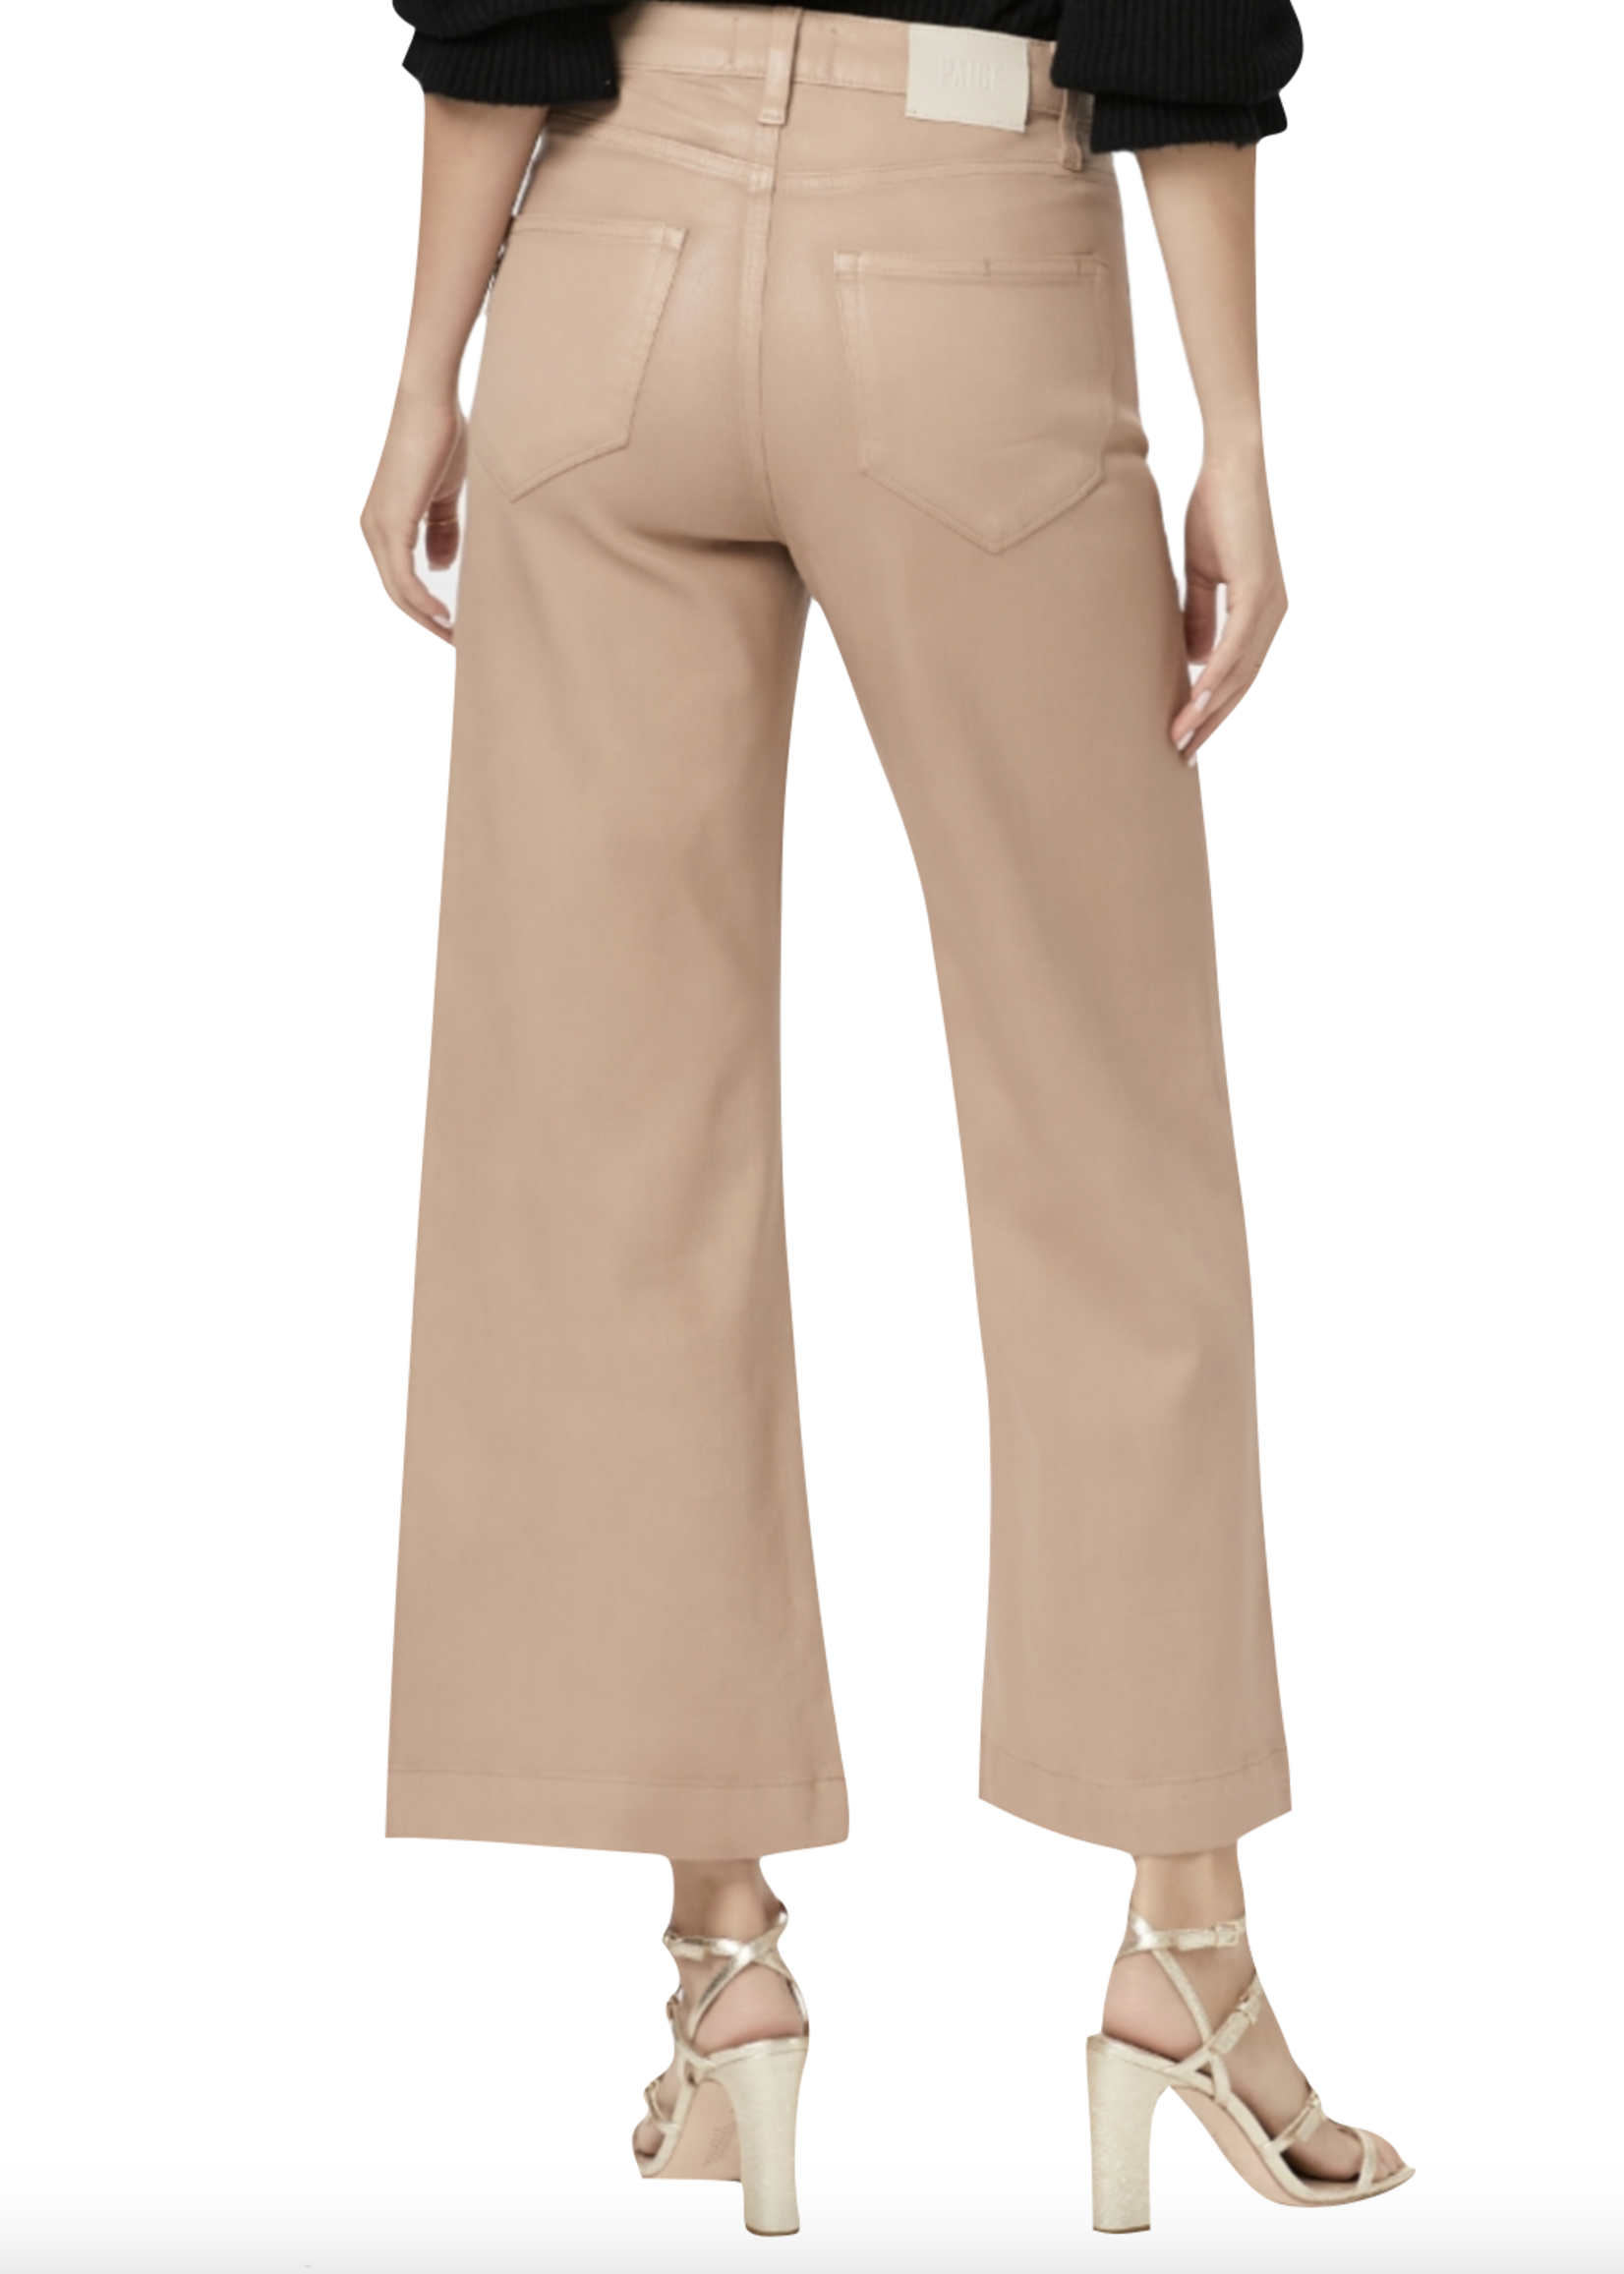 Paige Paige Anessa Luxe Coating Pant